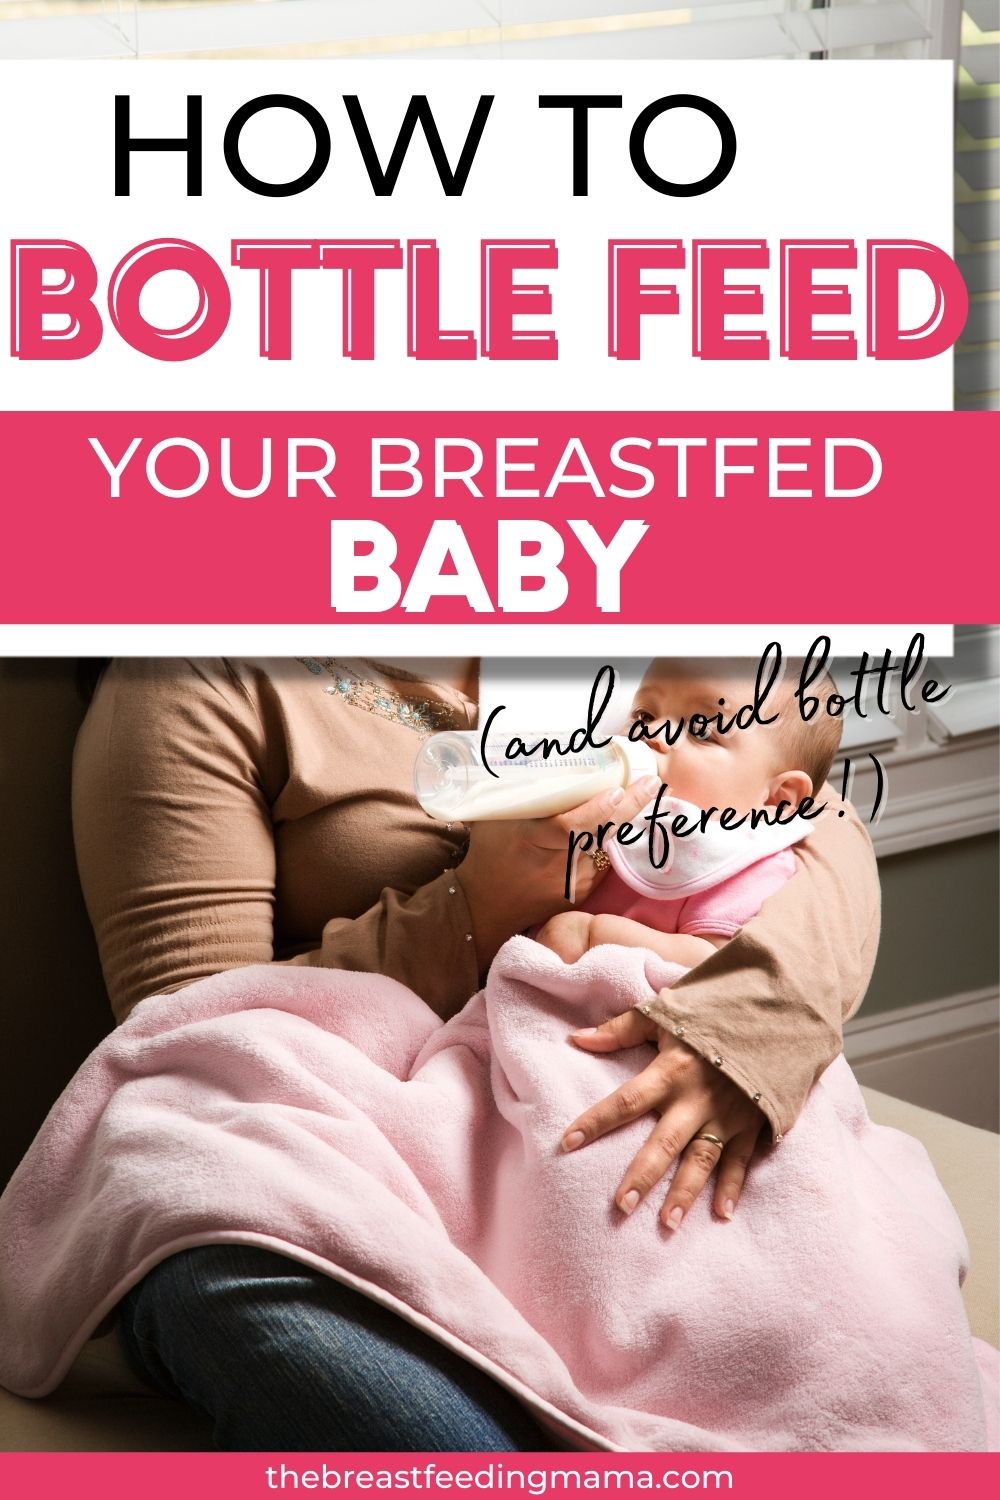 Breastfeeding is an excellent option for providing your baby with nutrients and a close bond. However, there are certainly going to be situations where you aren’t available to directly nurse your baby and you may need someone else to feed them your breastmilk or formula via a bottle. This is where paced bottle feeding comes into play - here is how to bottle feed a breastfed baby to prevent a bottle preference and overfeeding